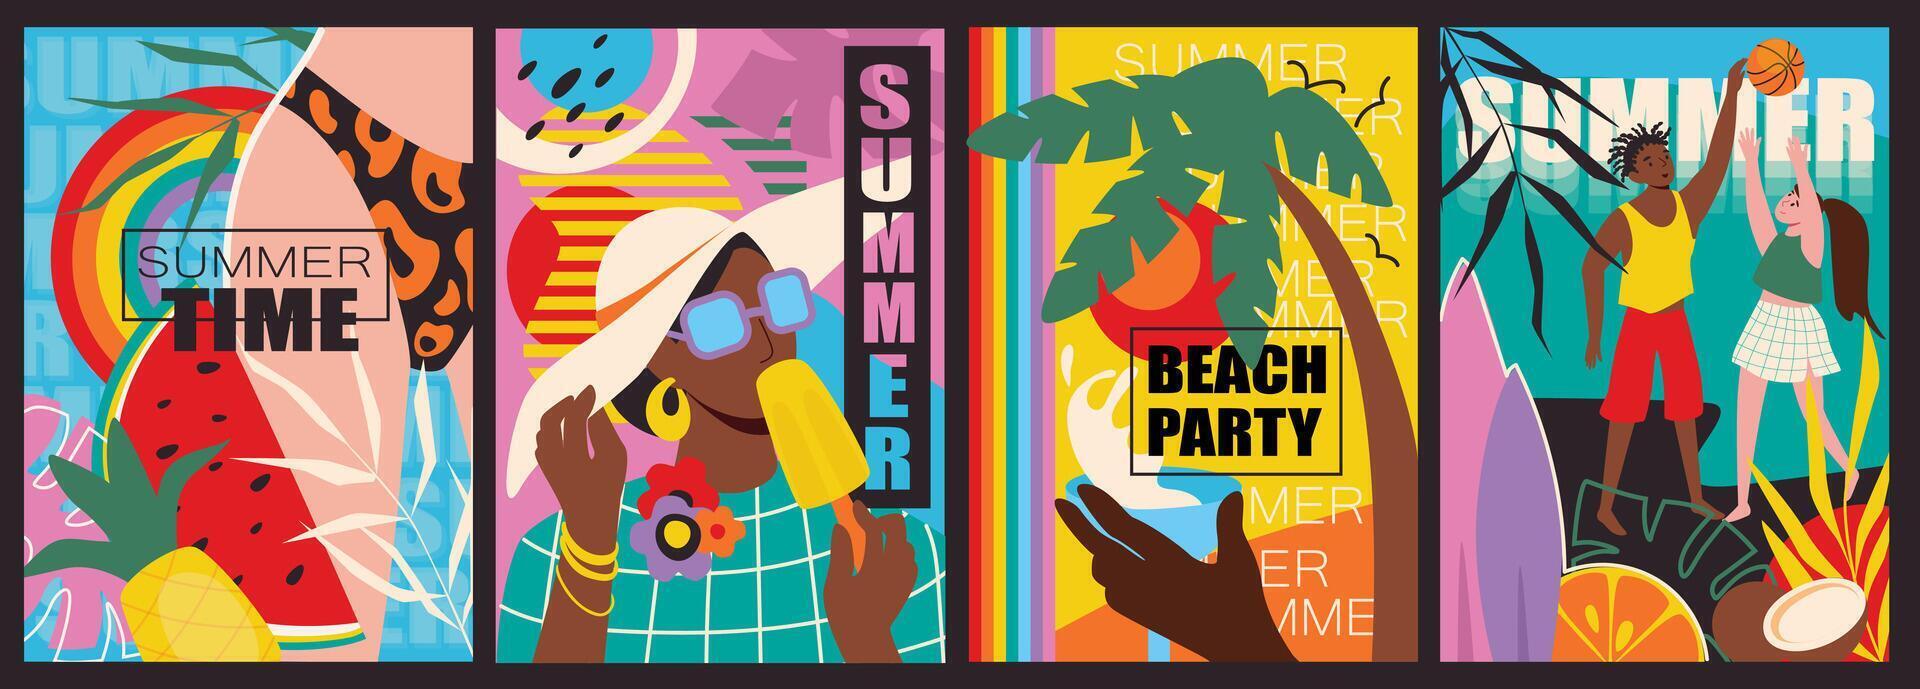 Summer time cover brochure set in trendy flat design. Poster templates with happy relax people at beach party, eat ice cream and watermelon and fresh fruits, play volleyball. Vector illustration.